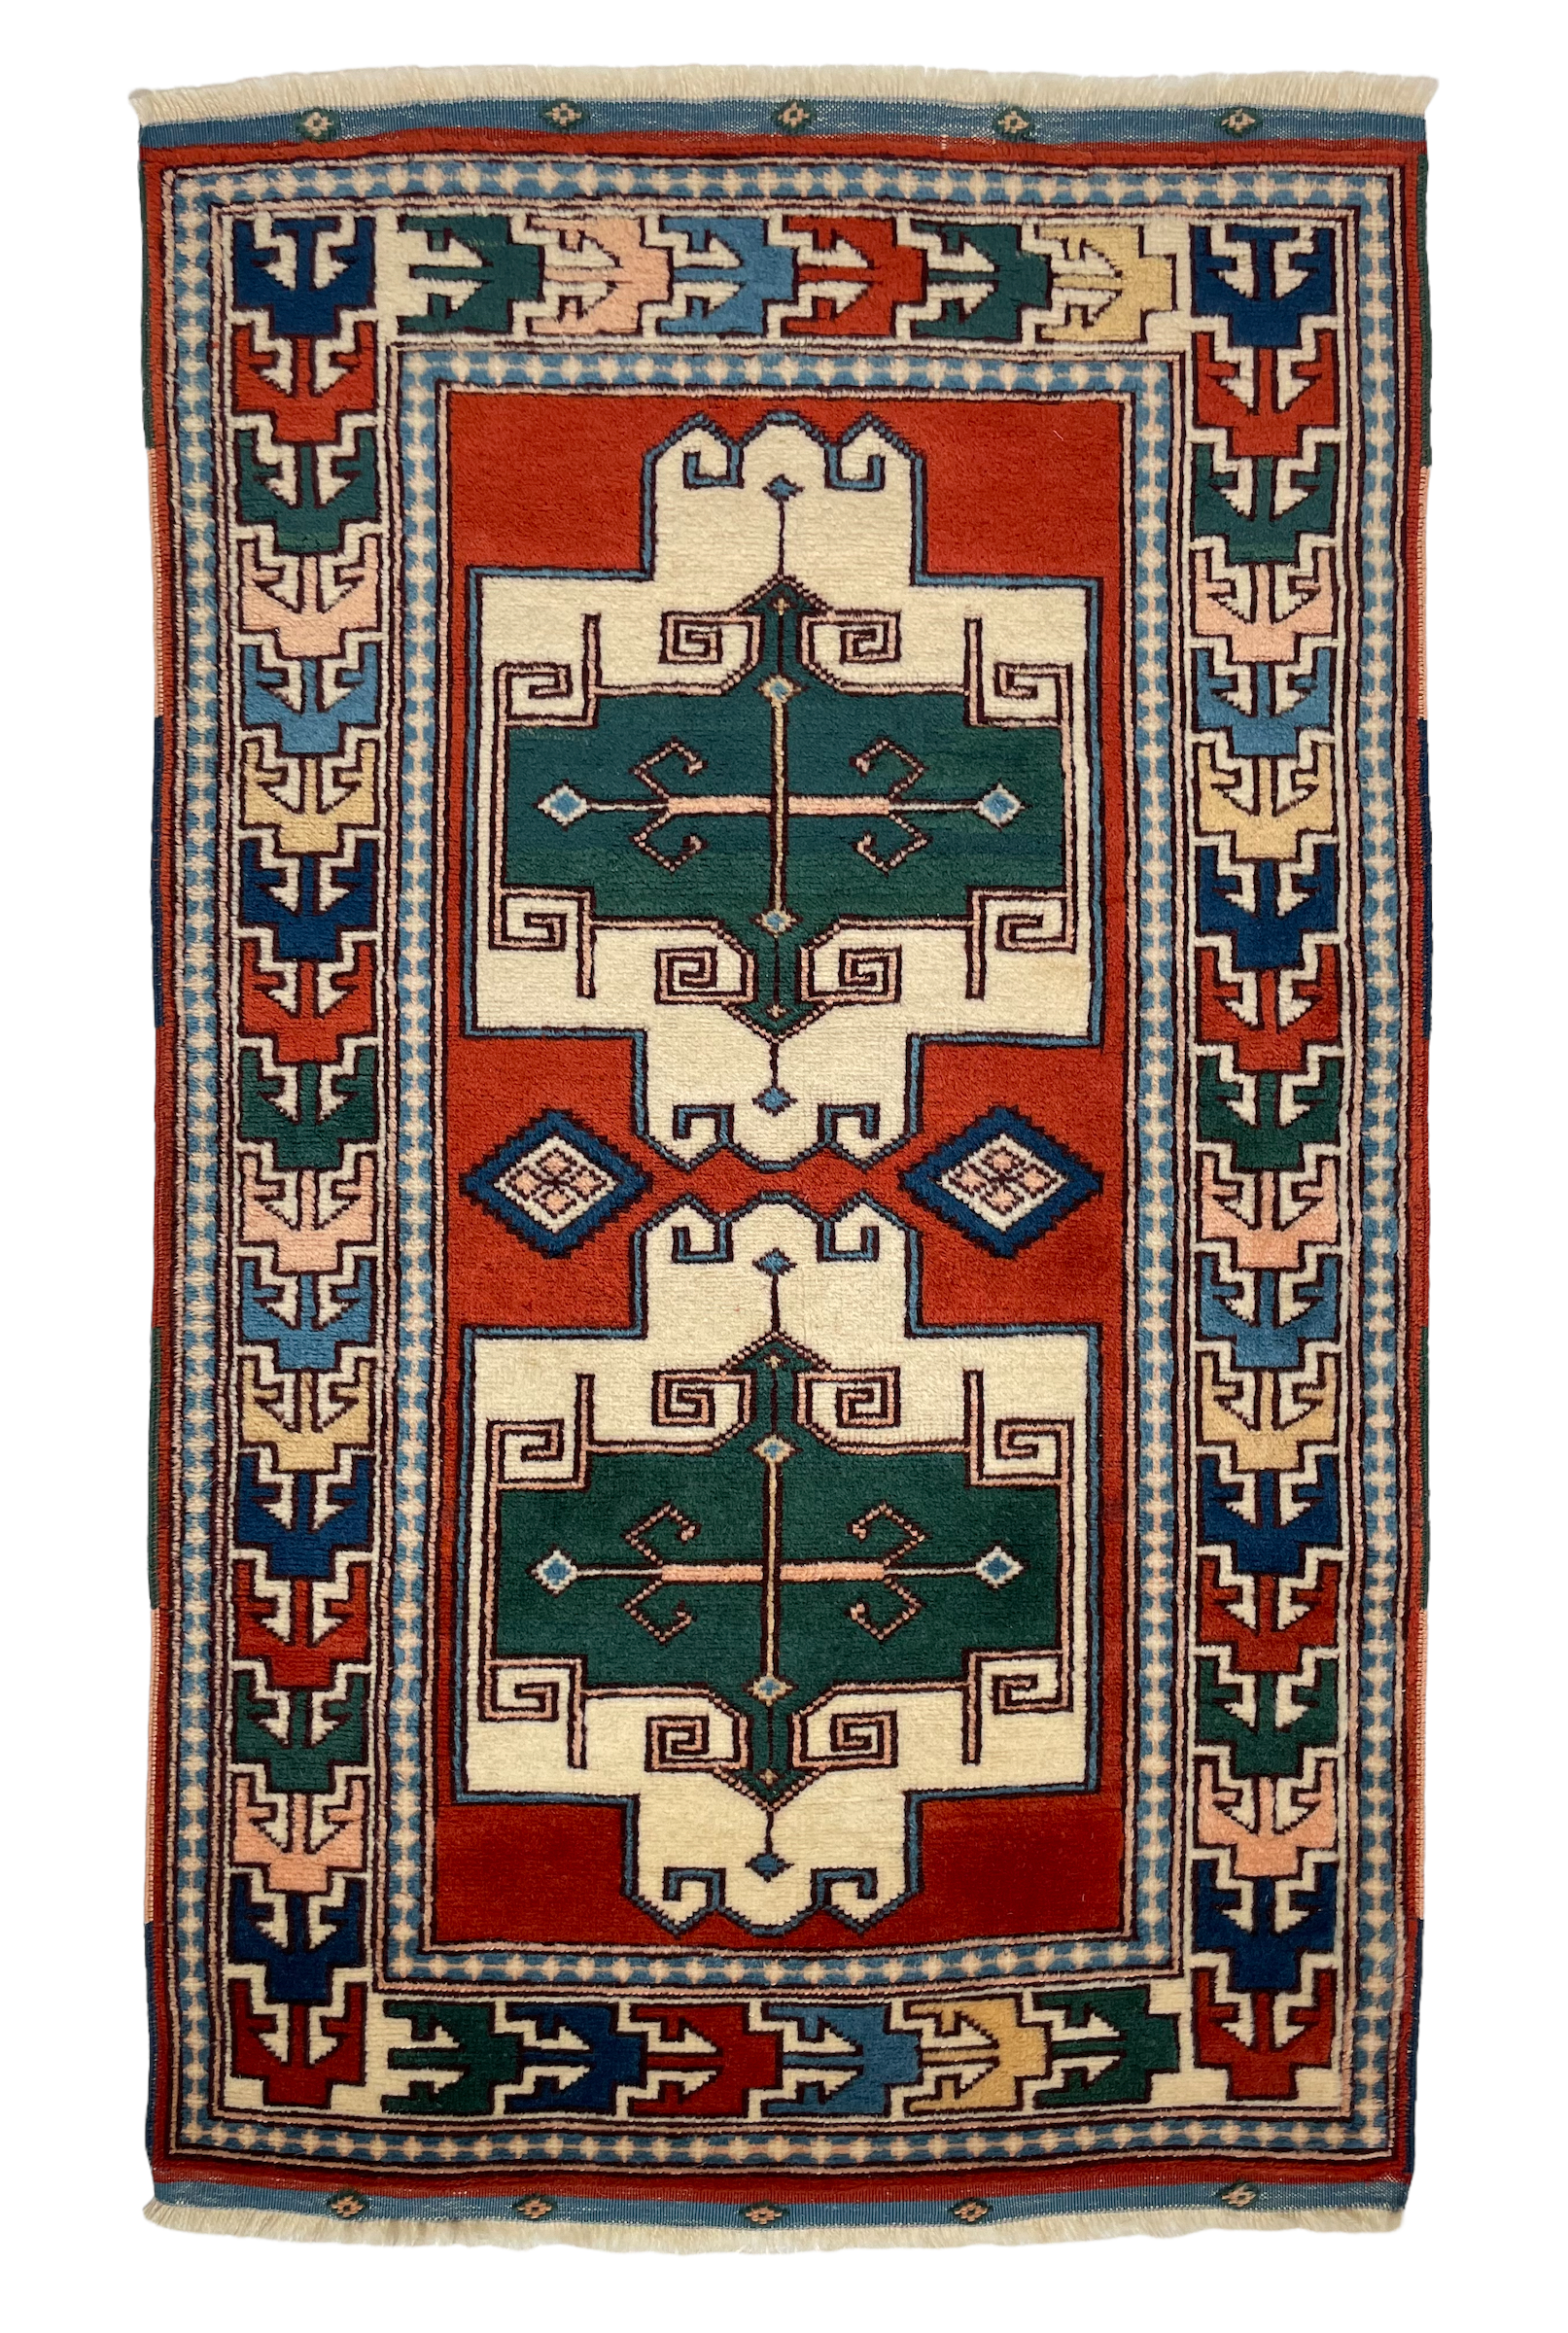 The Tajdid rug is one of our most unique finds and features a traditional Turkish design with bold, eccentric colors. 